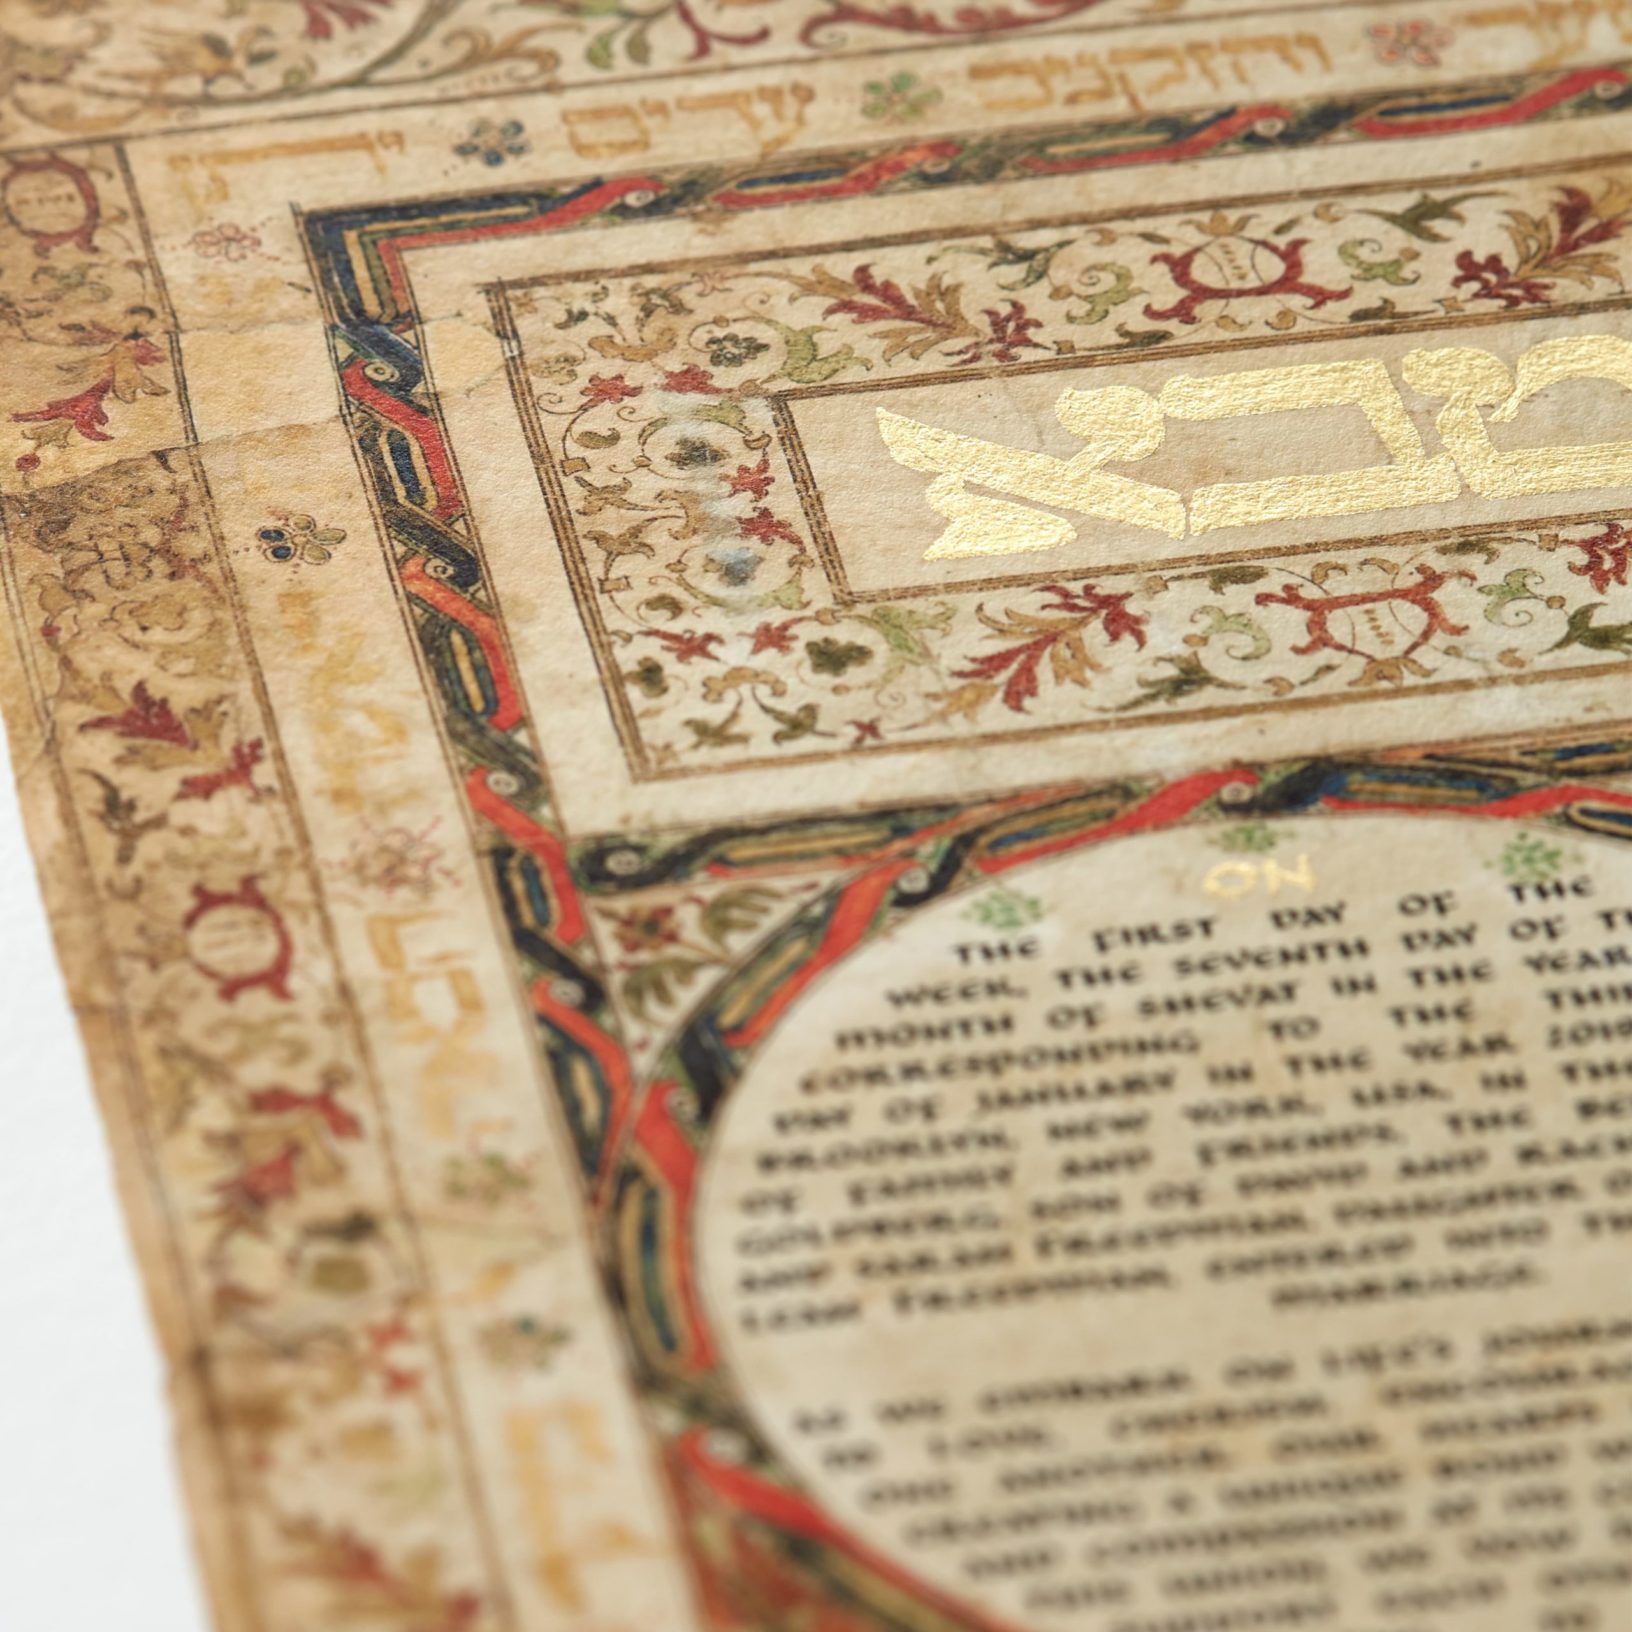 enice, Italy, 1614 - Gold Leaf Ketubah Online by The Jewish Museum